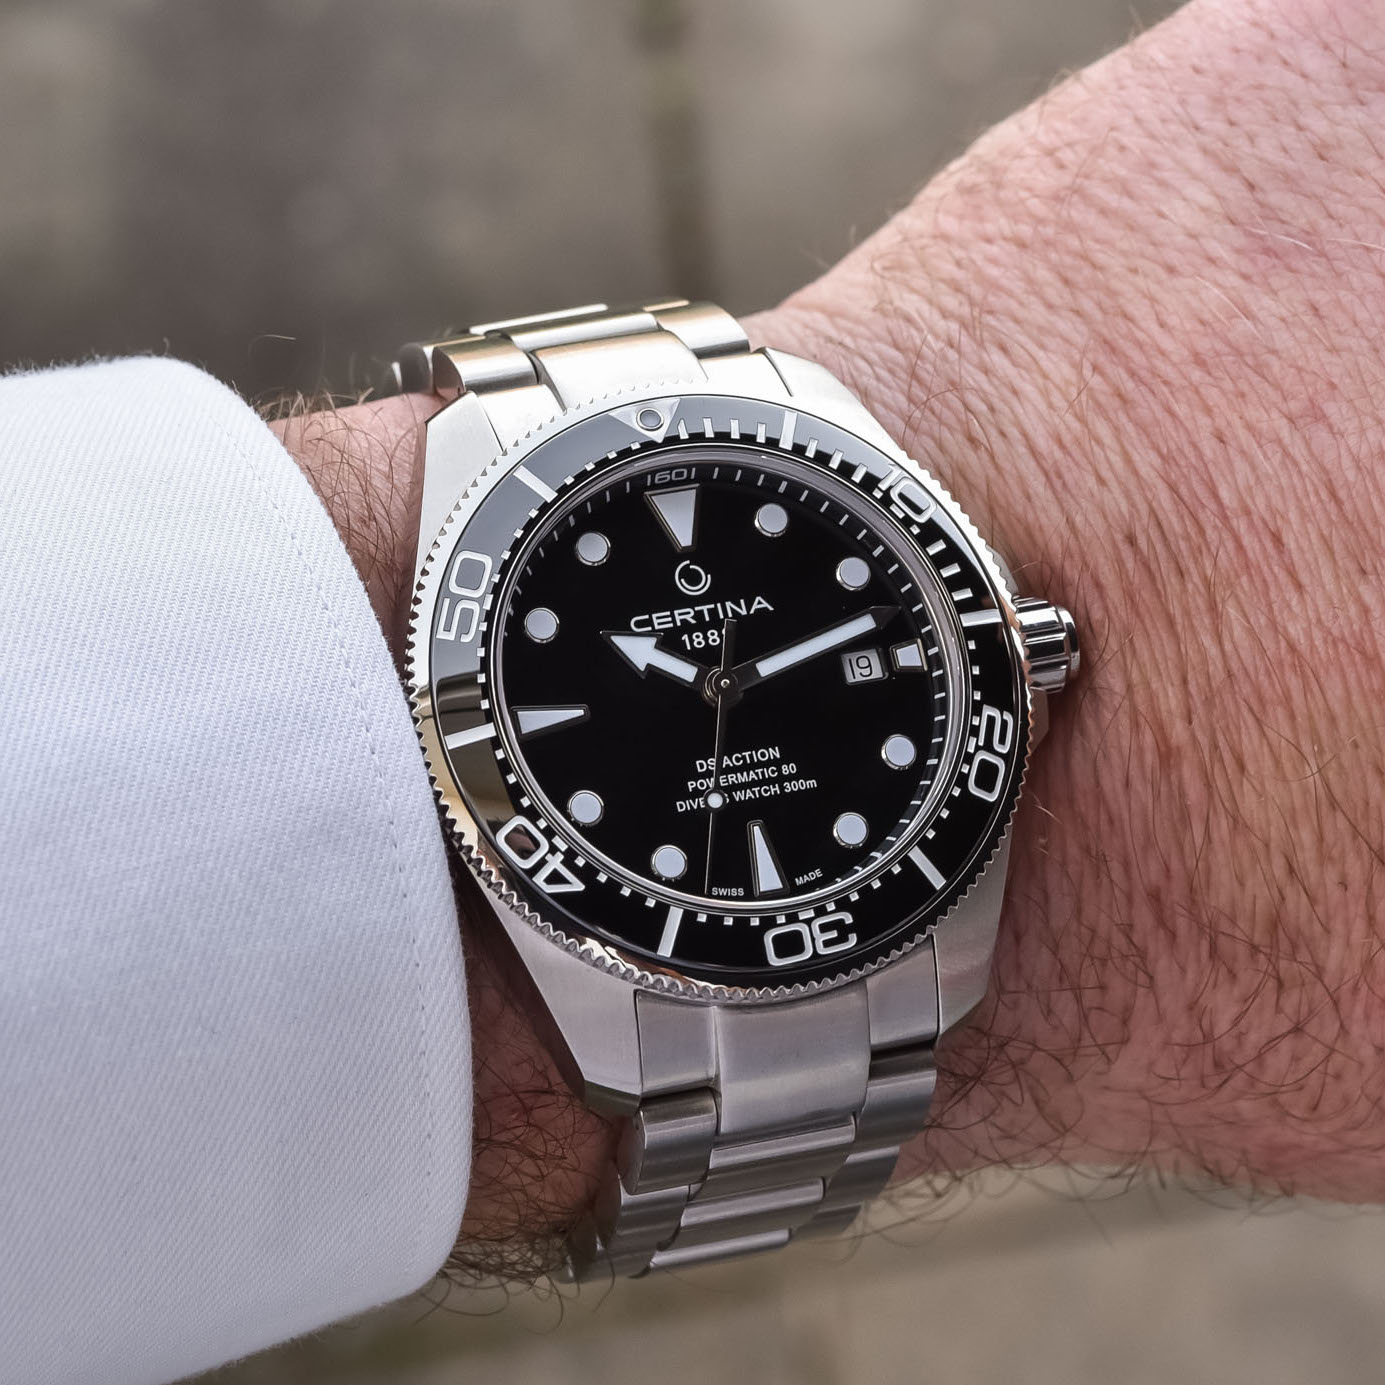 Certina DS Action Diver 43mm Powermatic 80 Update 2022 Ceramic - C032.607.11.051.00 - hands-on review - 9